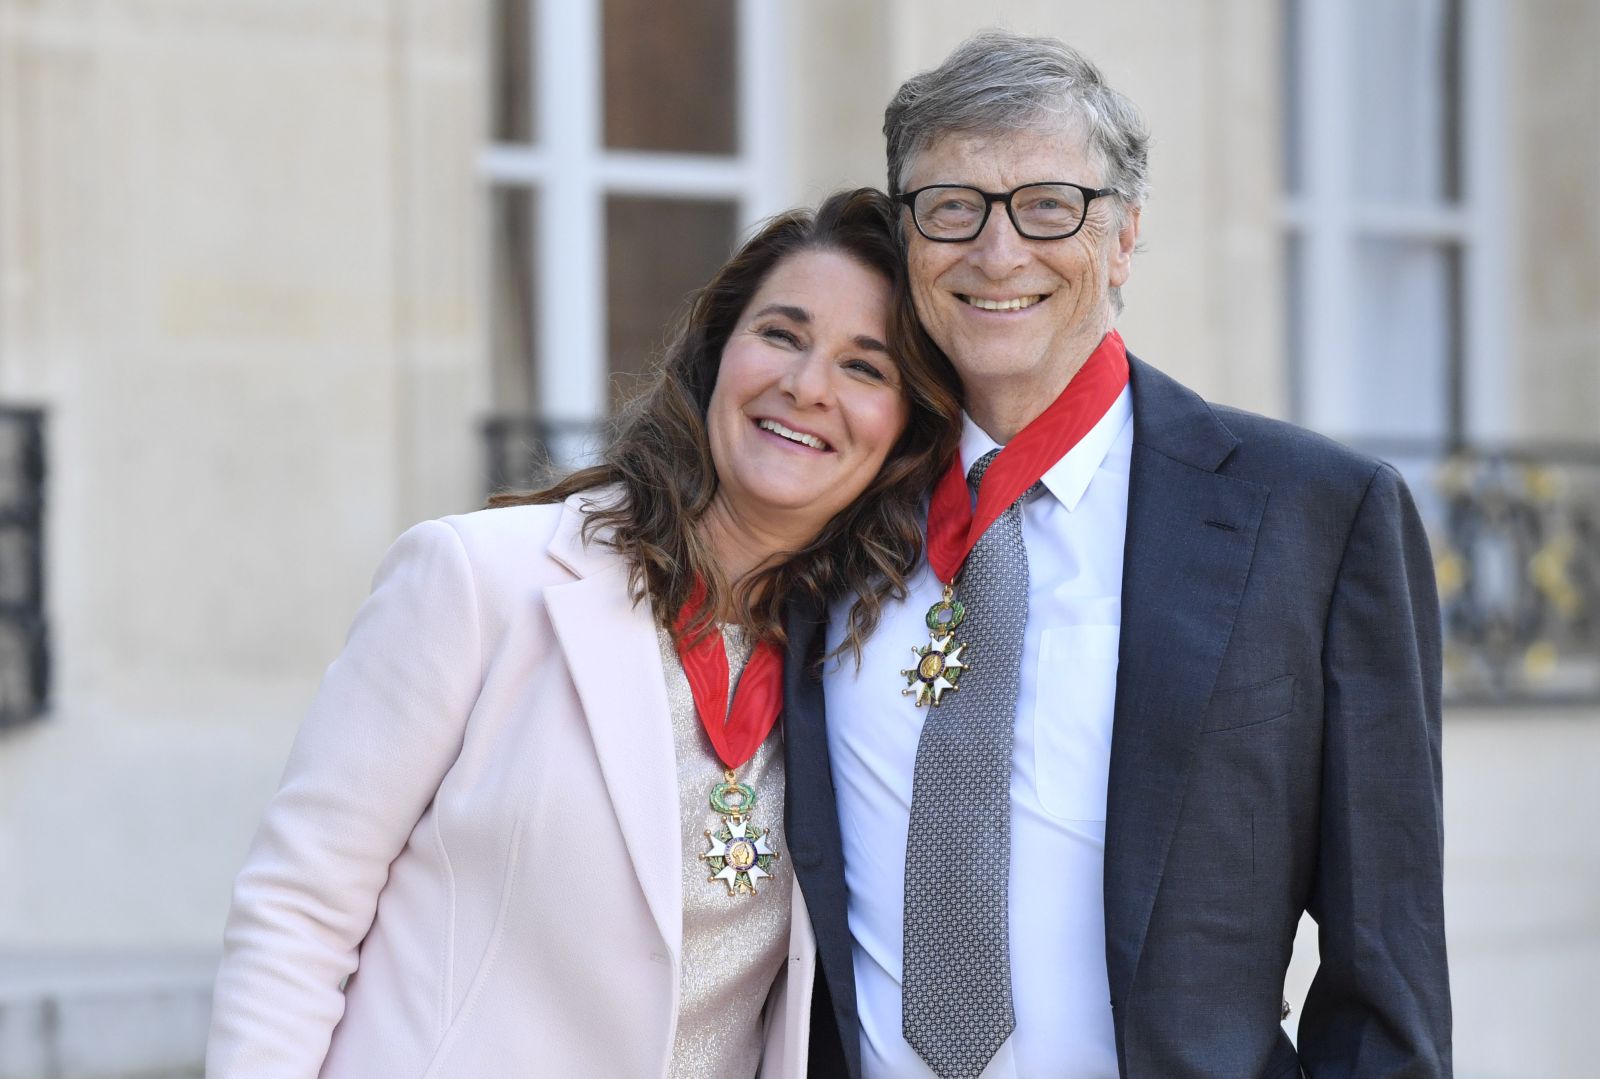 epa09176360 (FILE) - Microsoft co-founder and philanthropist Bill Gates (R) and his wife Melinda Gates (L), Co-Chair of the Bill and Melinda Gates Foundation, leave the Elysee Palace after they received the French Legion of Honor medal, in Paris, France, France, 21 April 2017 (reissued 03 May 2021). Bill and Melinda Gates are splitting up after 27 years of marriage, Bill Gates announced on 03 May 2021 in a tweet.  EPA/JULIEN DE ROSA *** Local Caption *** 53469750